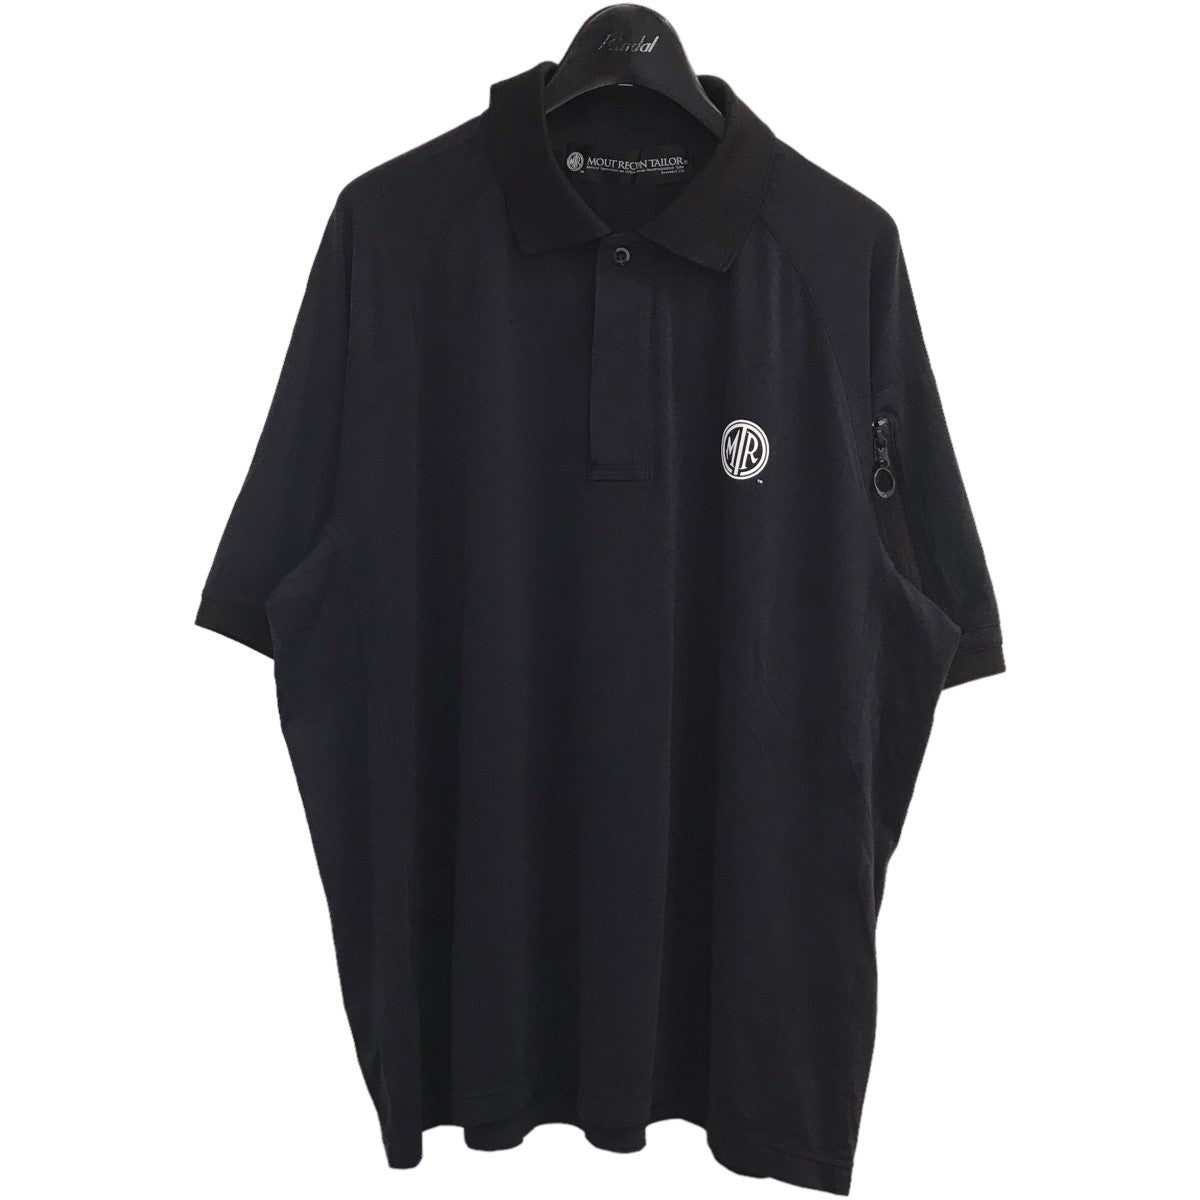 MOUT RECON TAILOR(マウトリーコンテイラー) 「Tactical Polo Shirts 